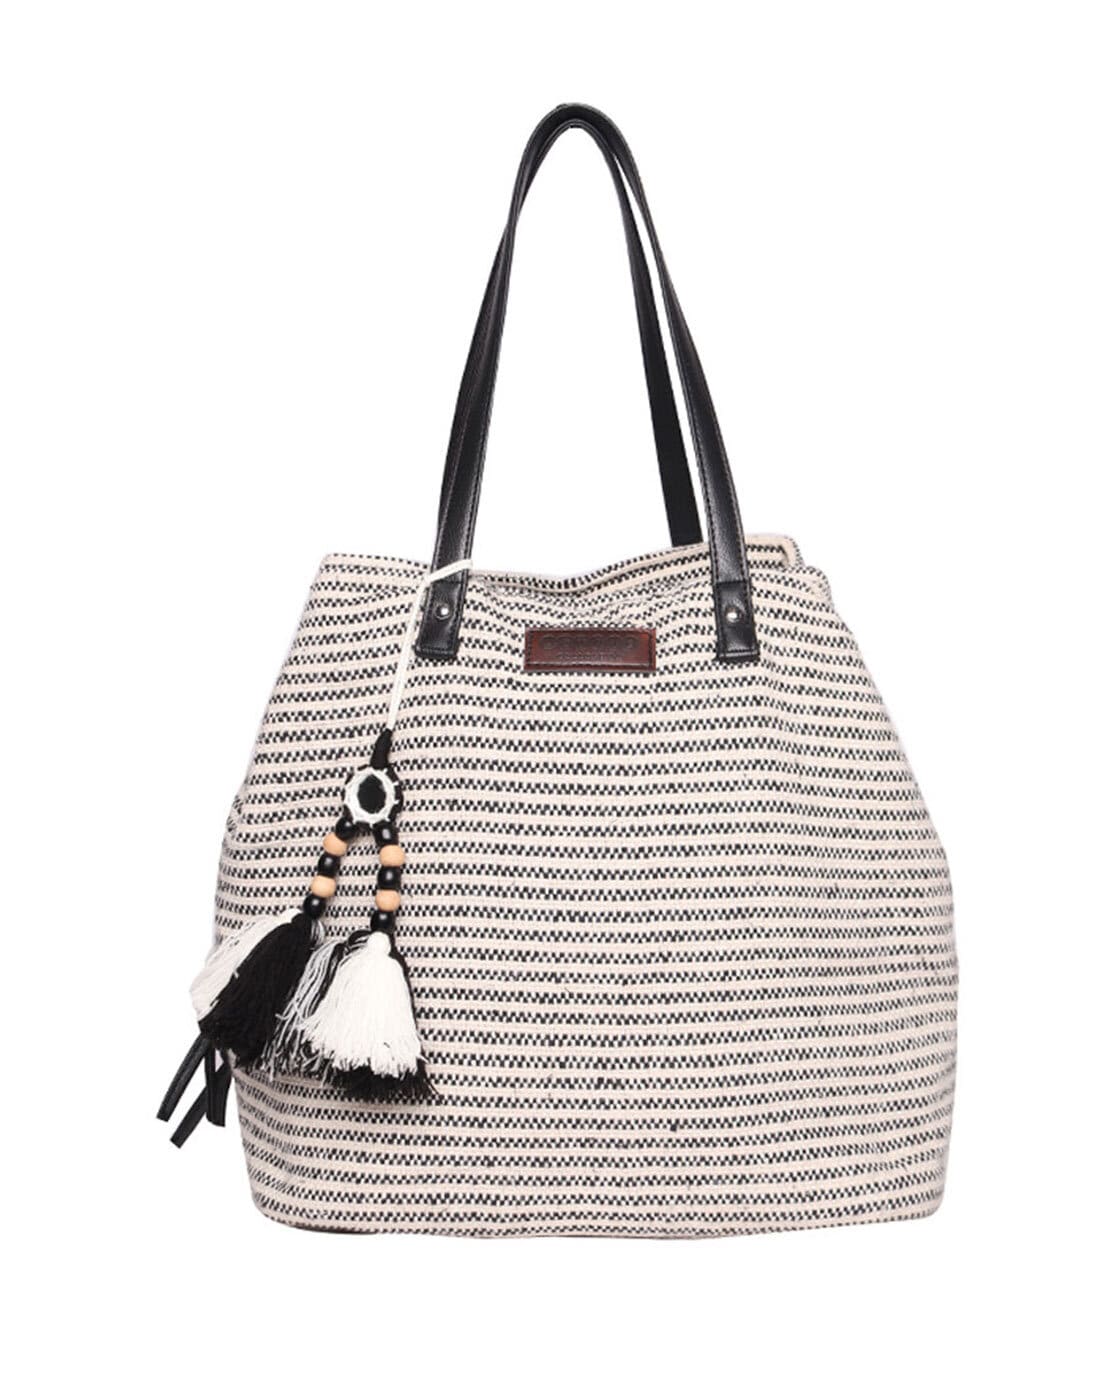 Buy Shoulder Bags for Women Black and White Striped Online In